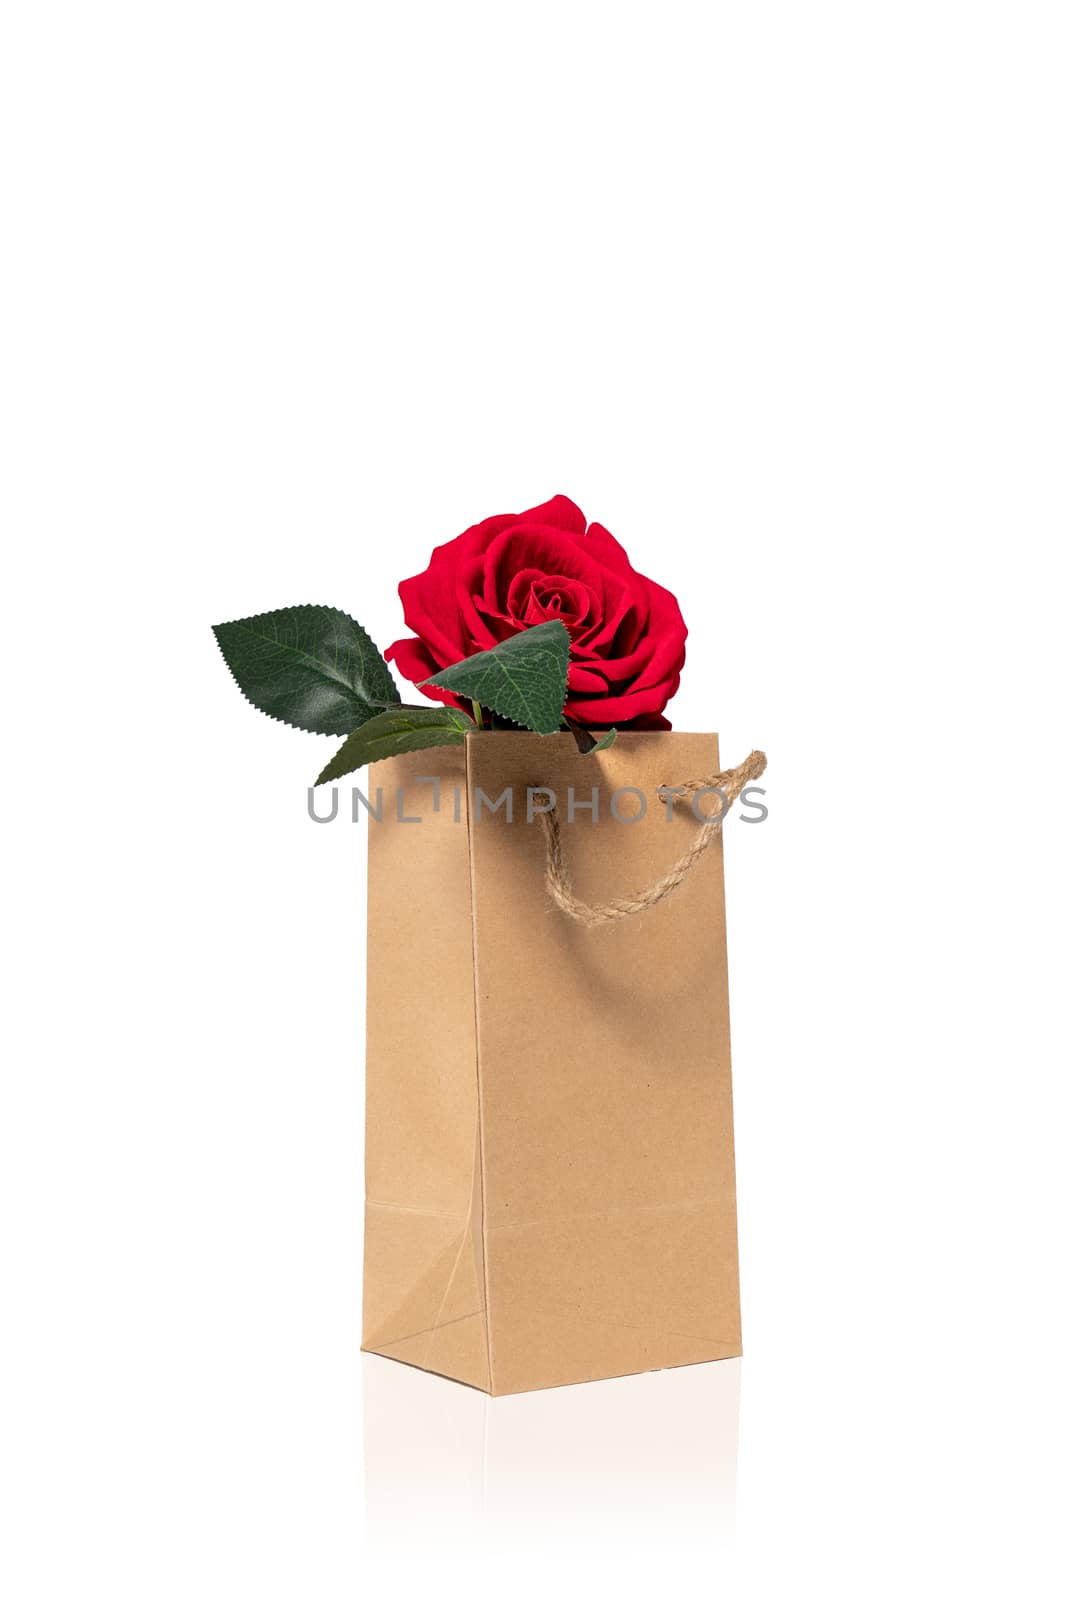 A red rose in a bag by Nawoot